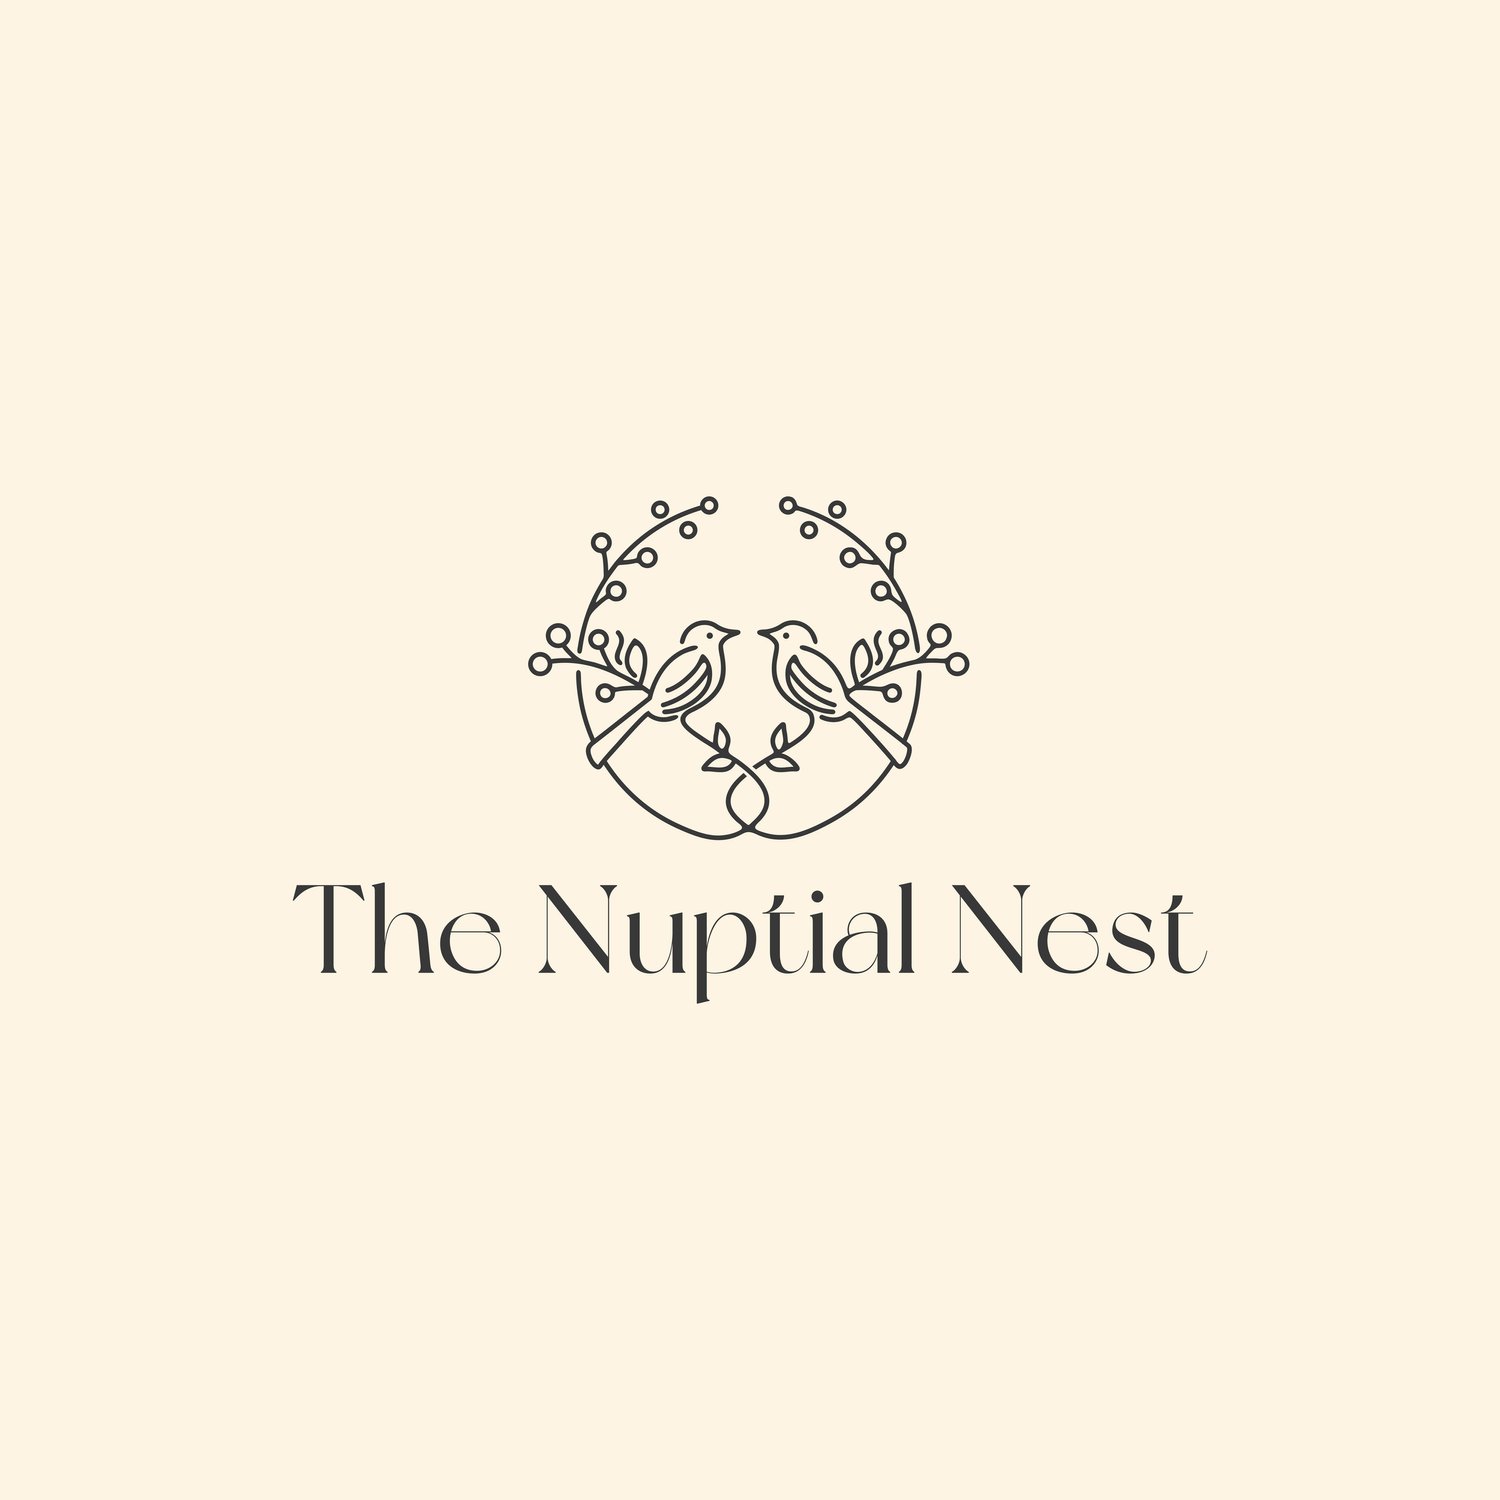 The Nuptial Nest